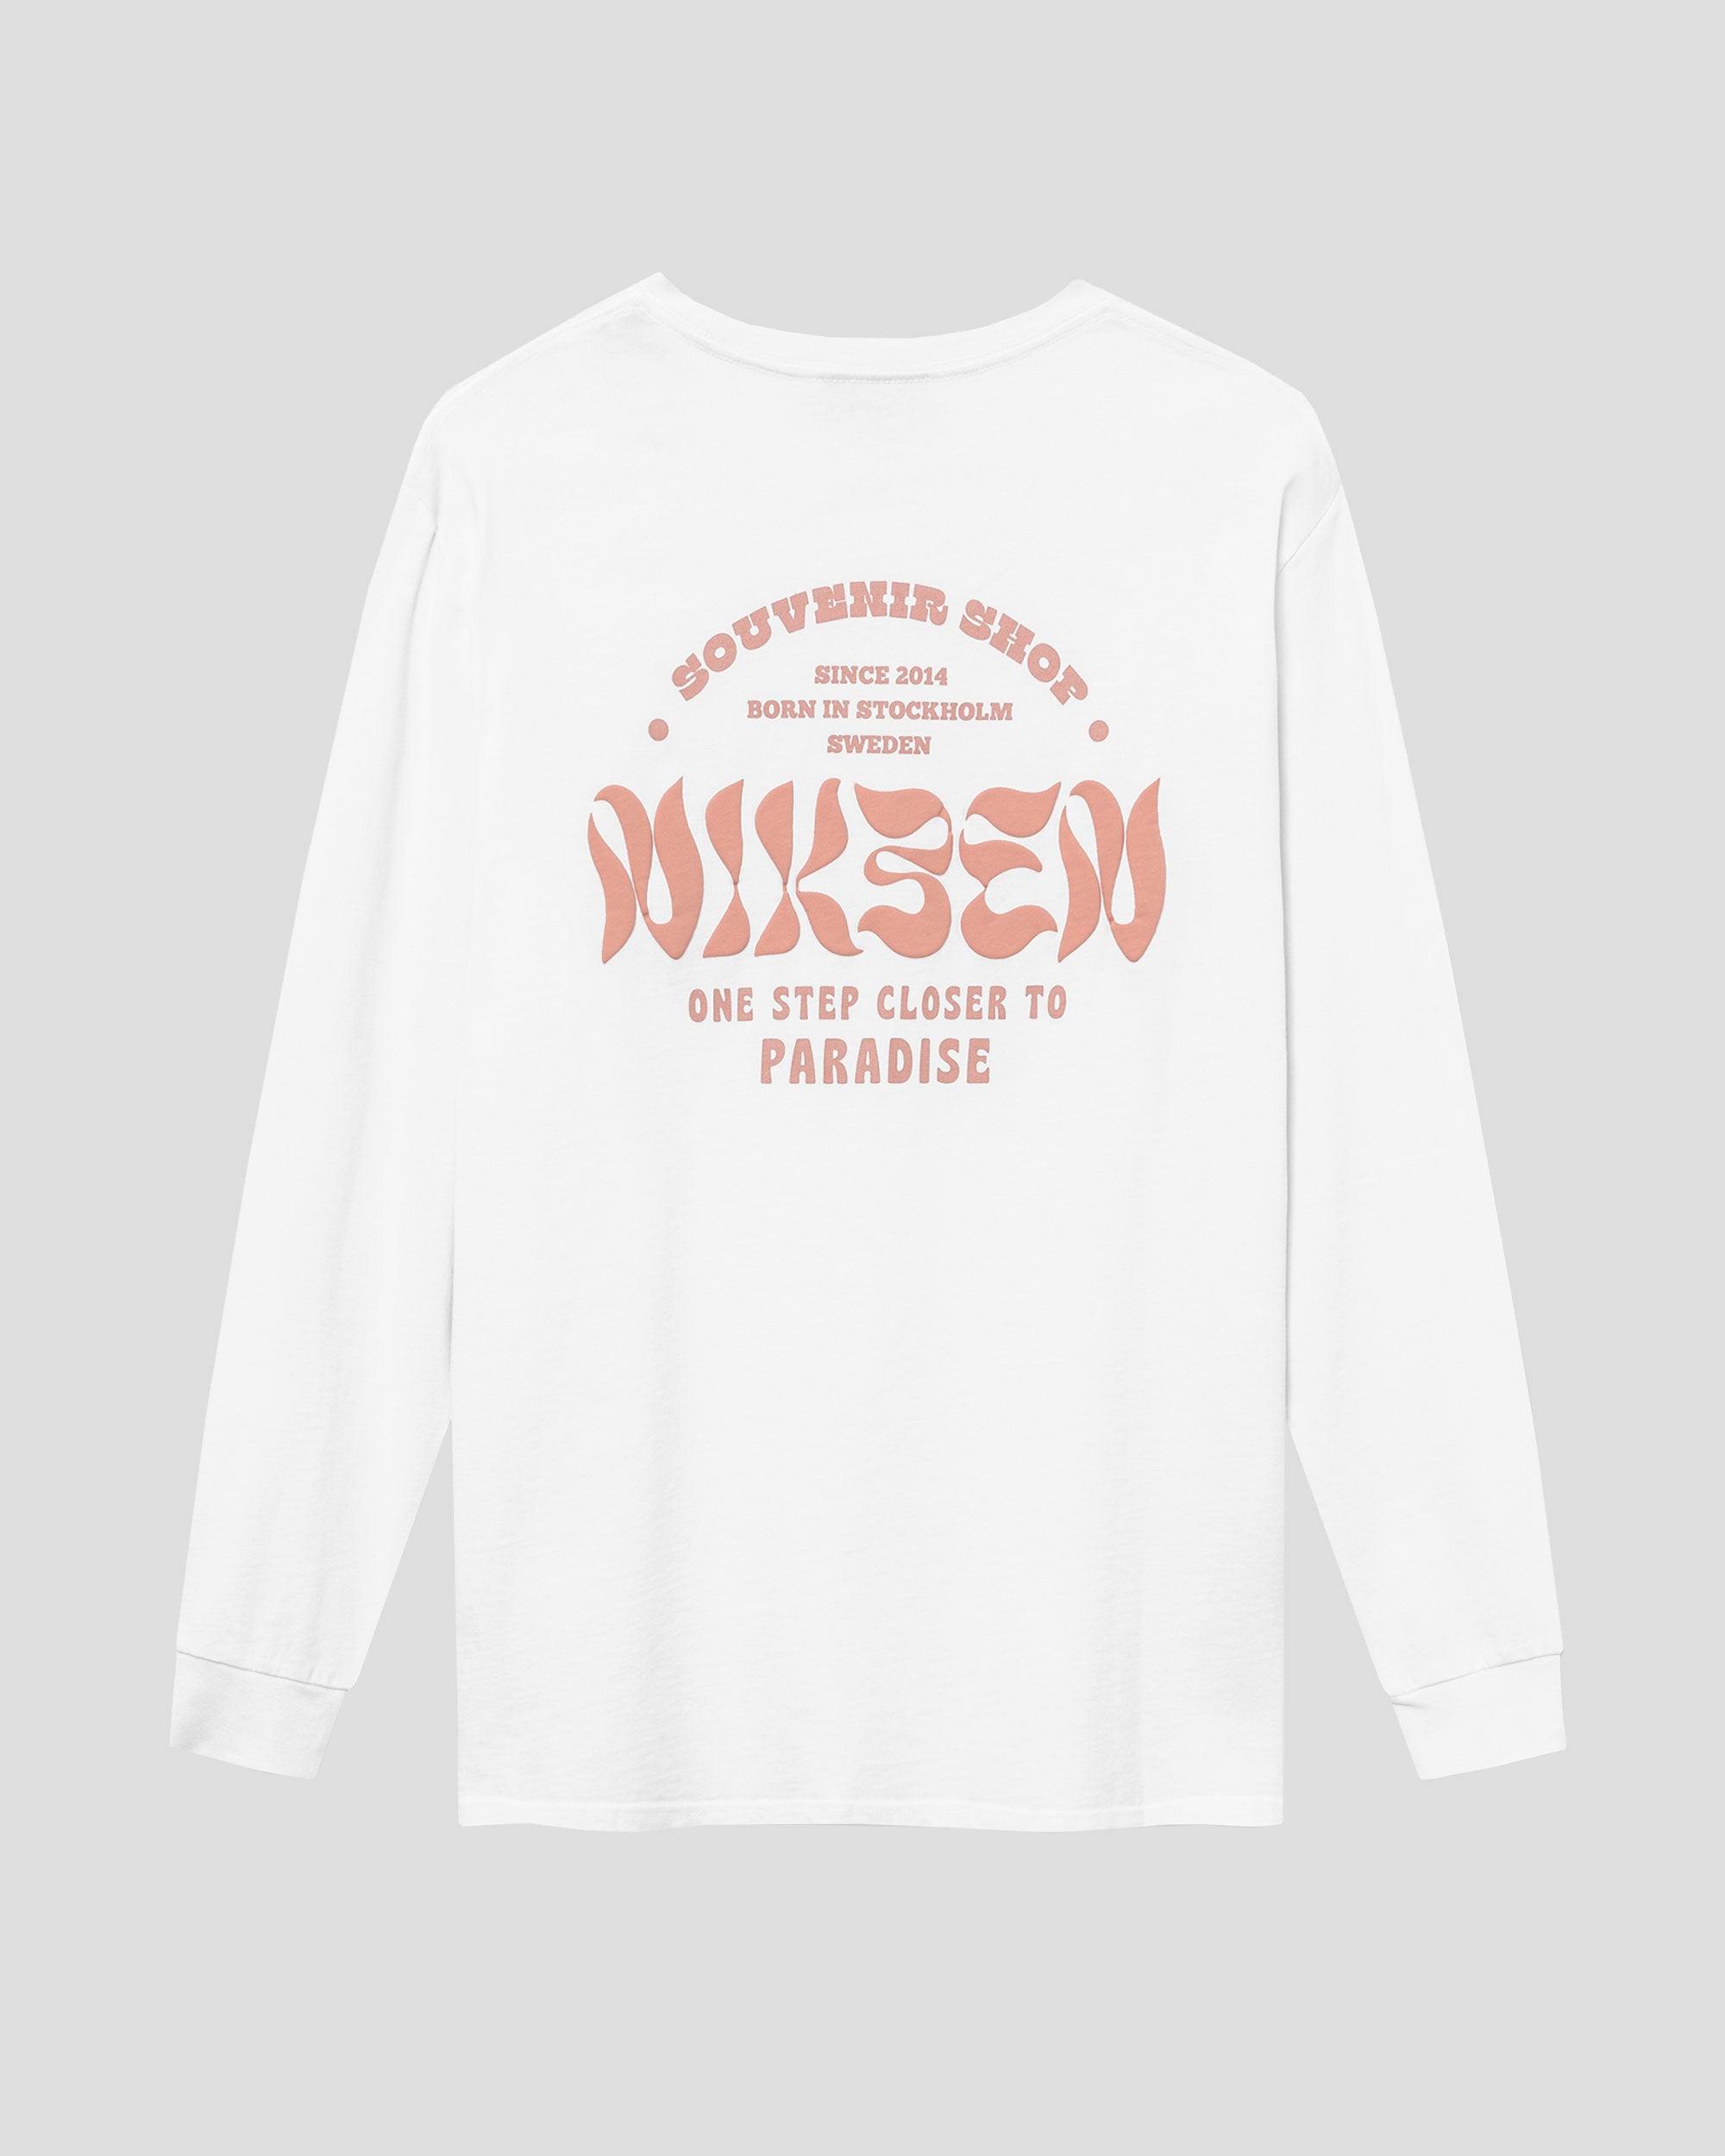 Back view of white long-sleeved t-shirt with large orange text print on the back.